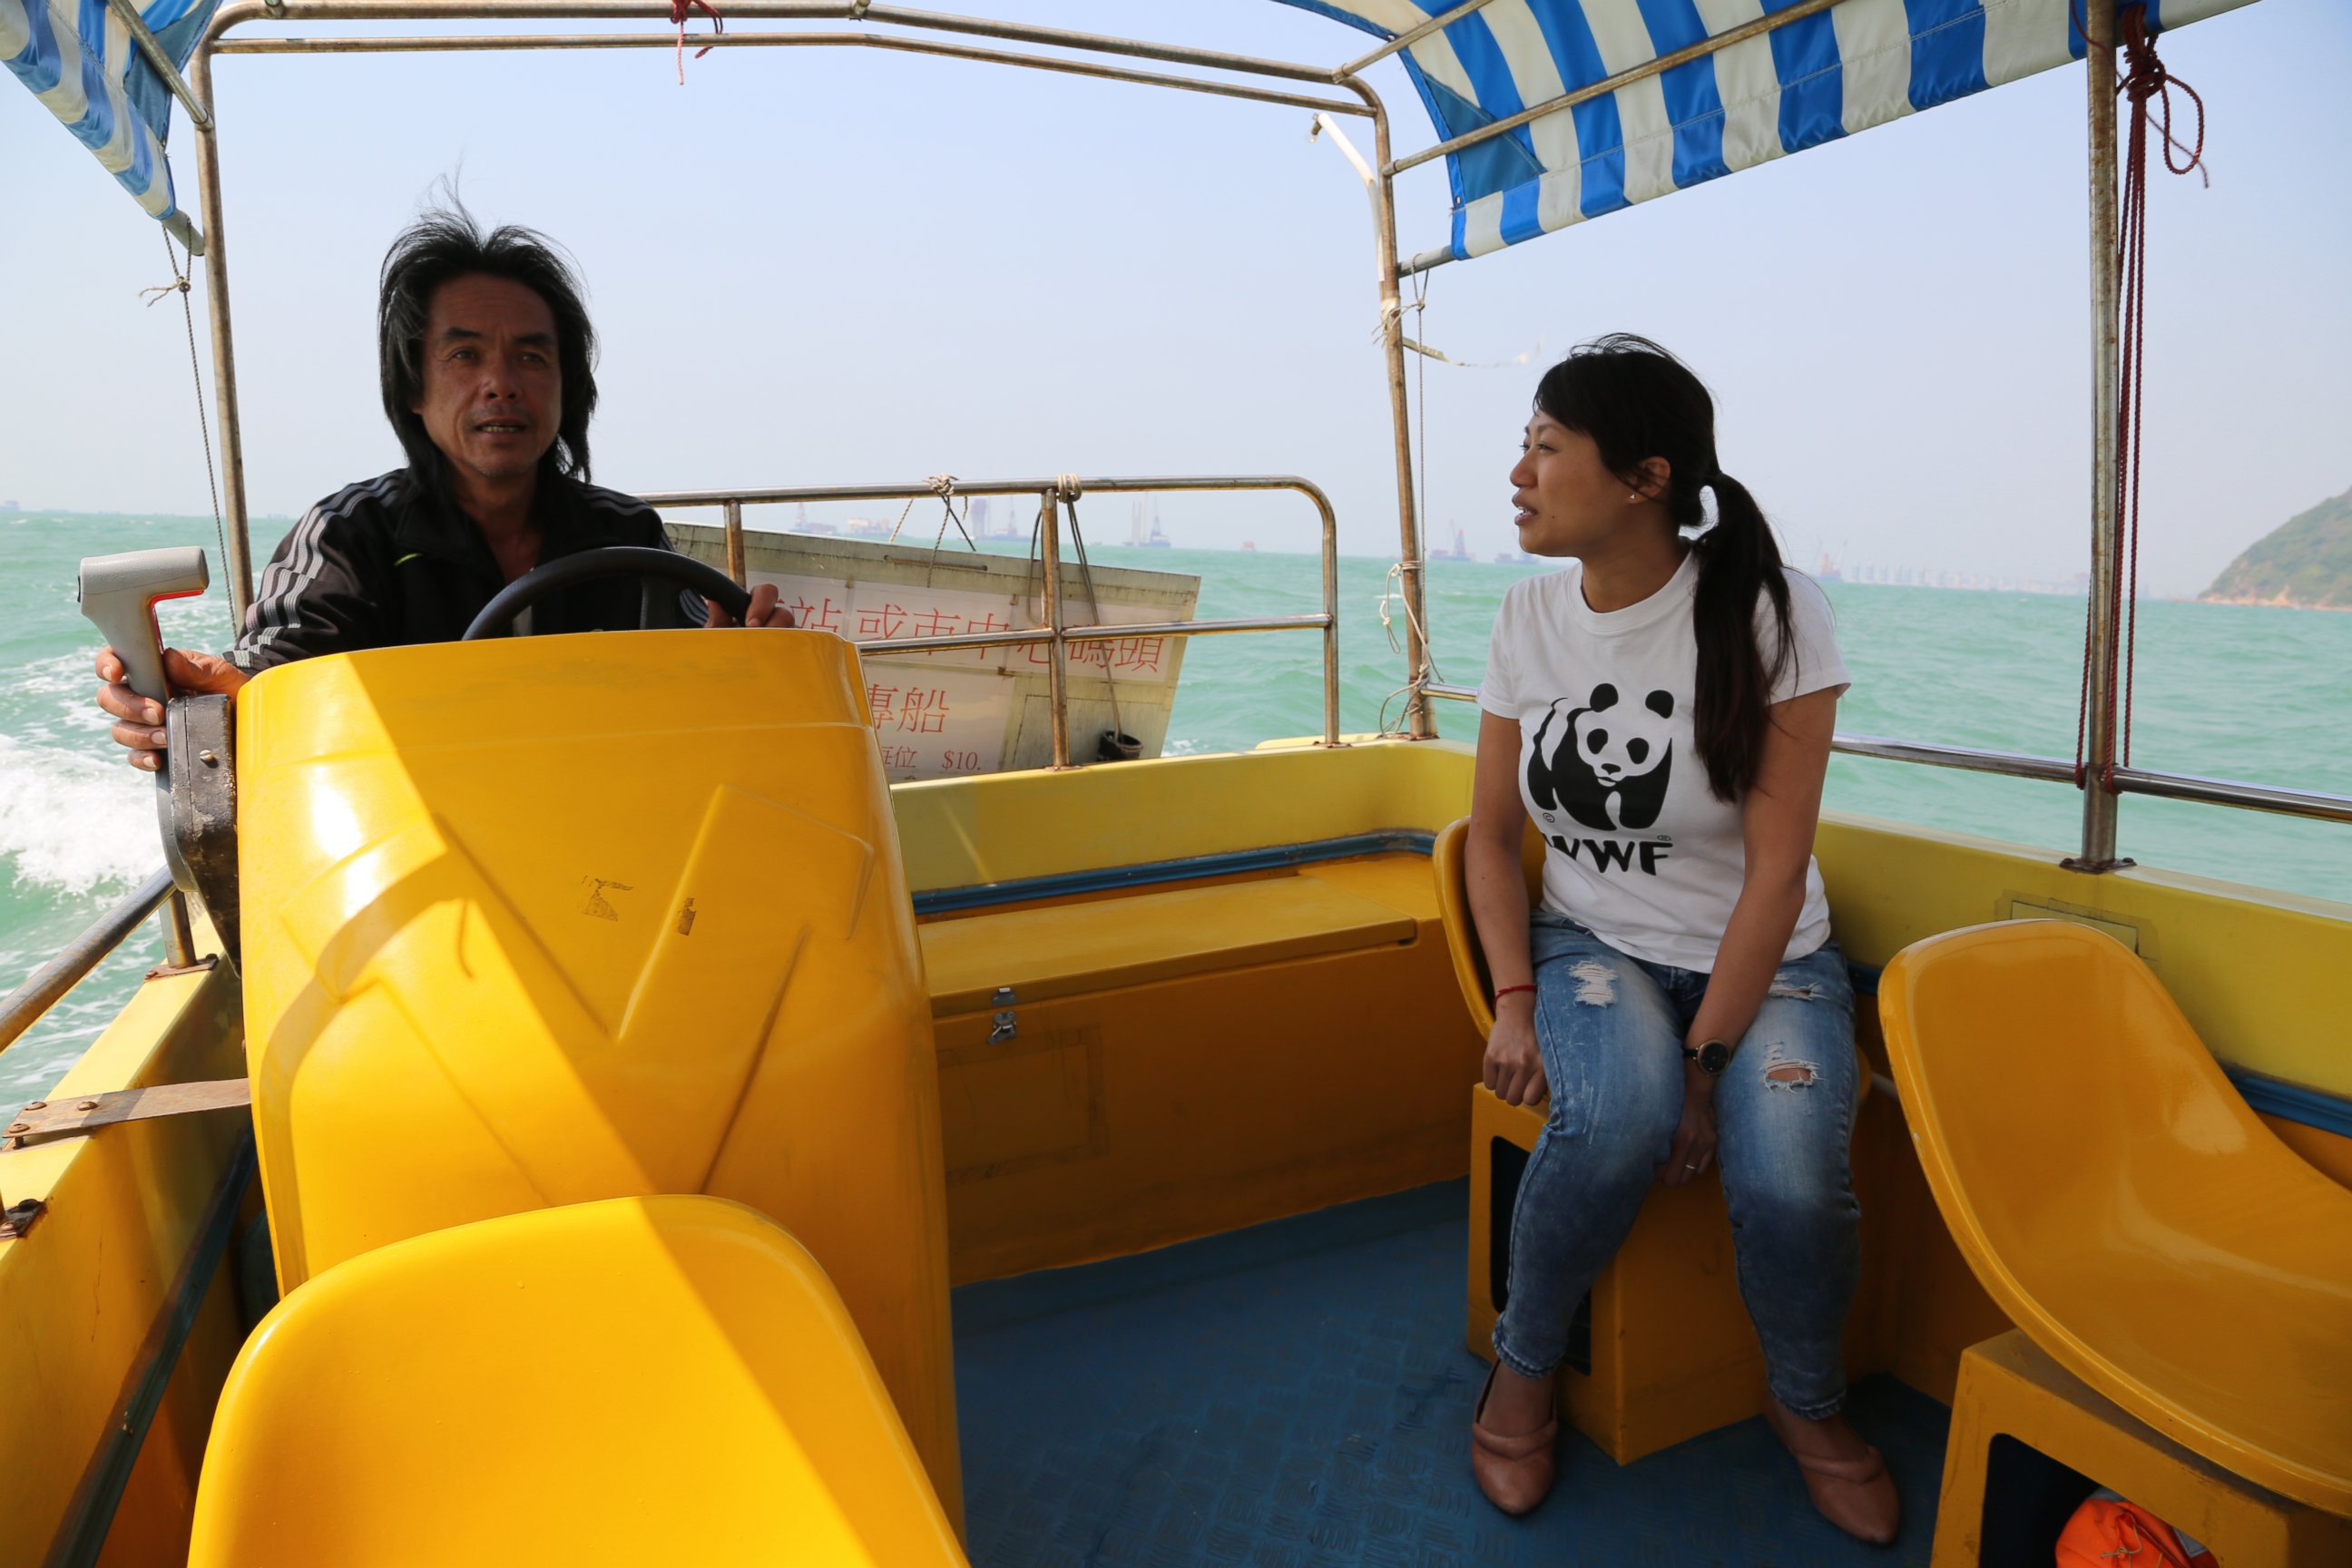 PHOTO: Samantha Lee and local dolphin watching operator scouting the waters for dolphins.